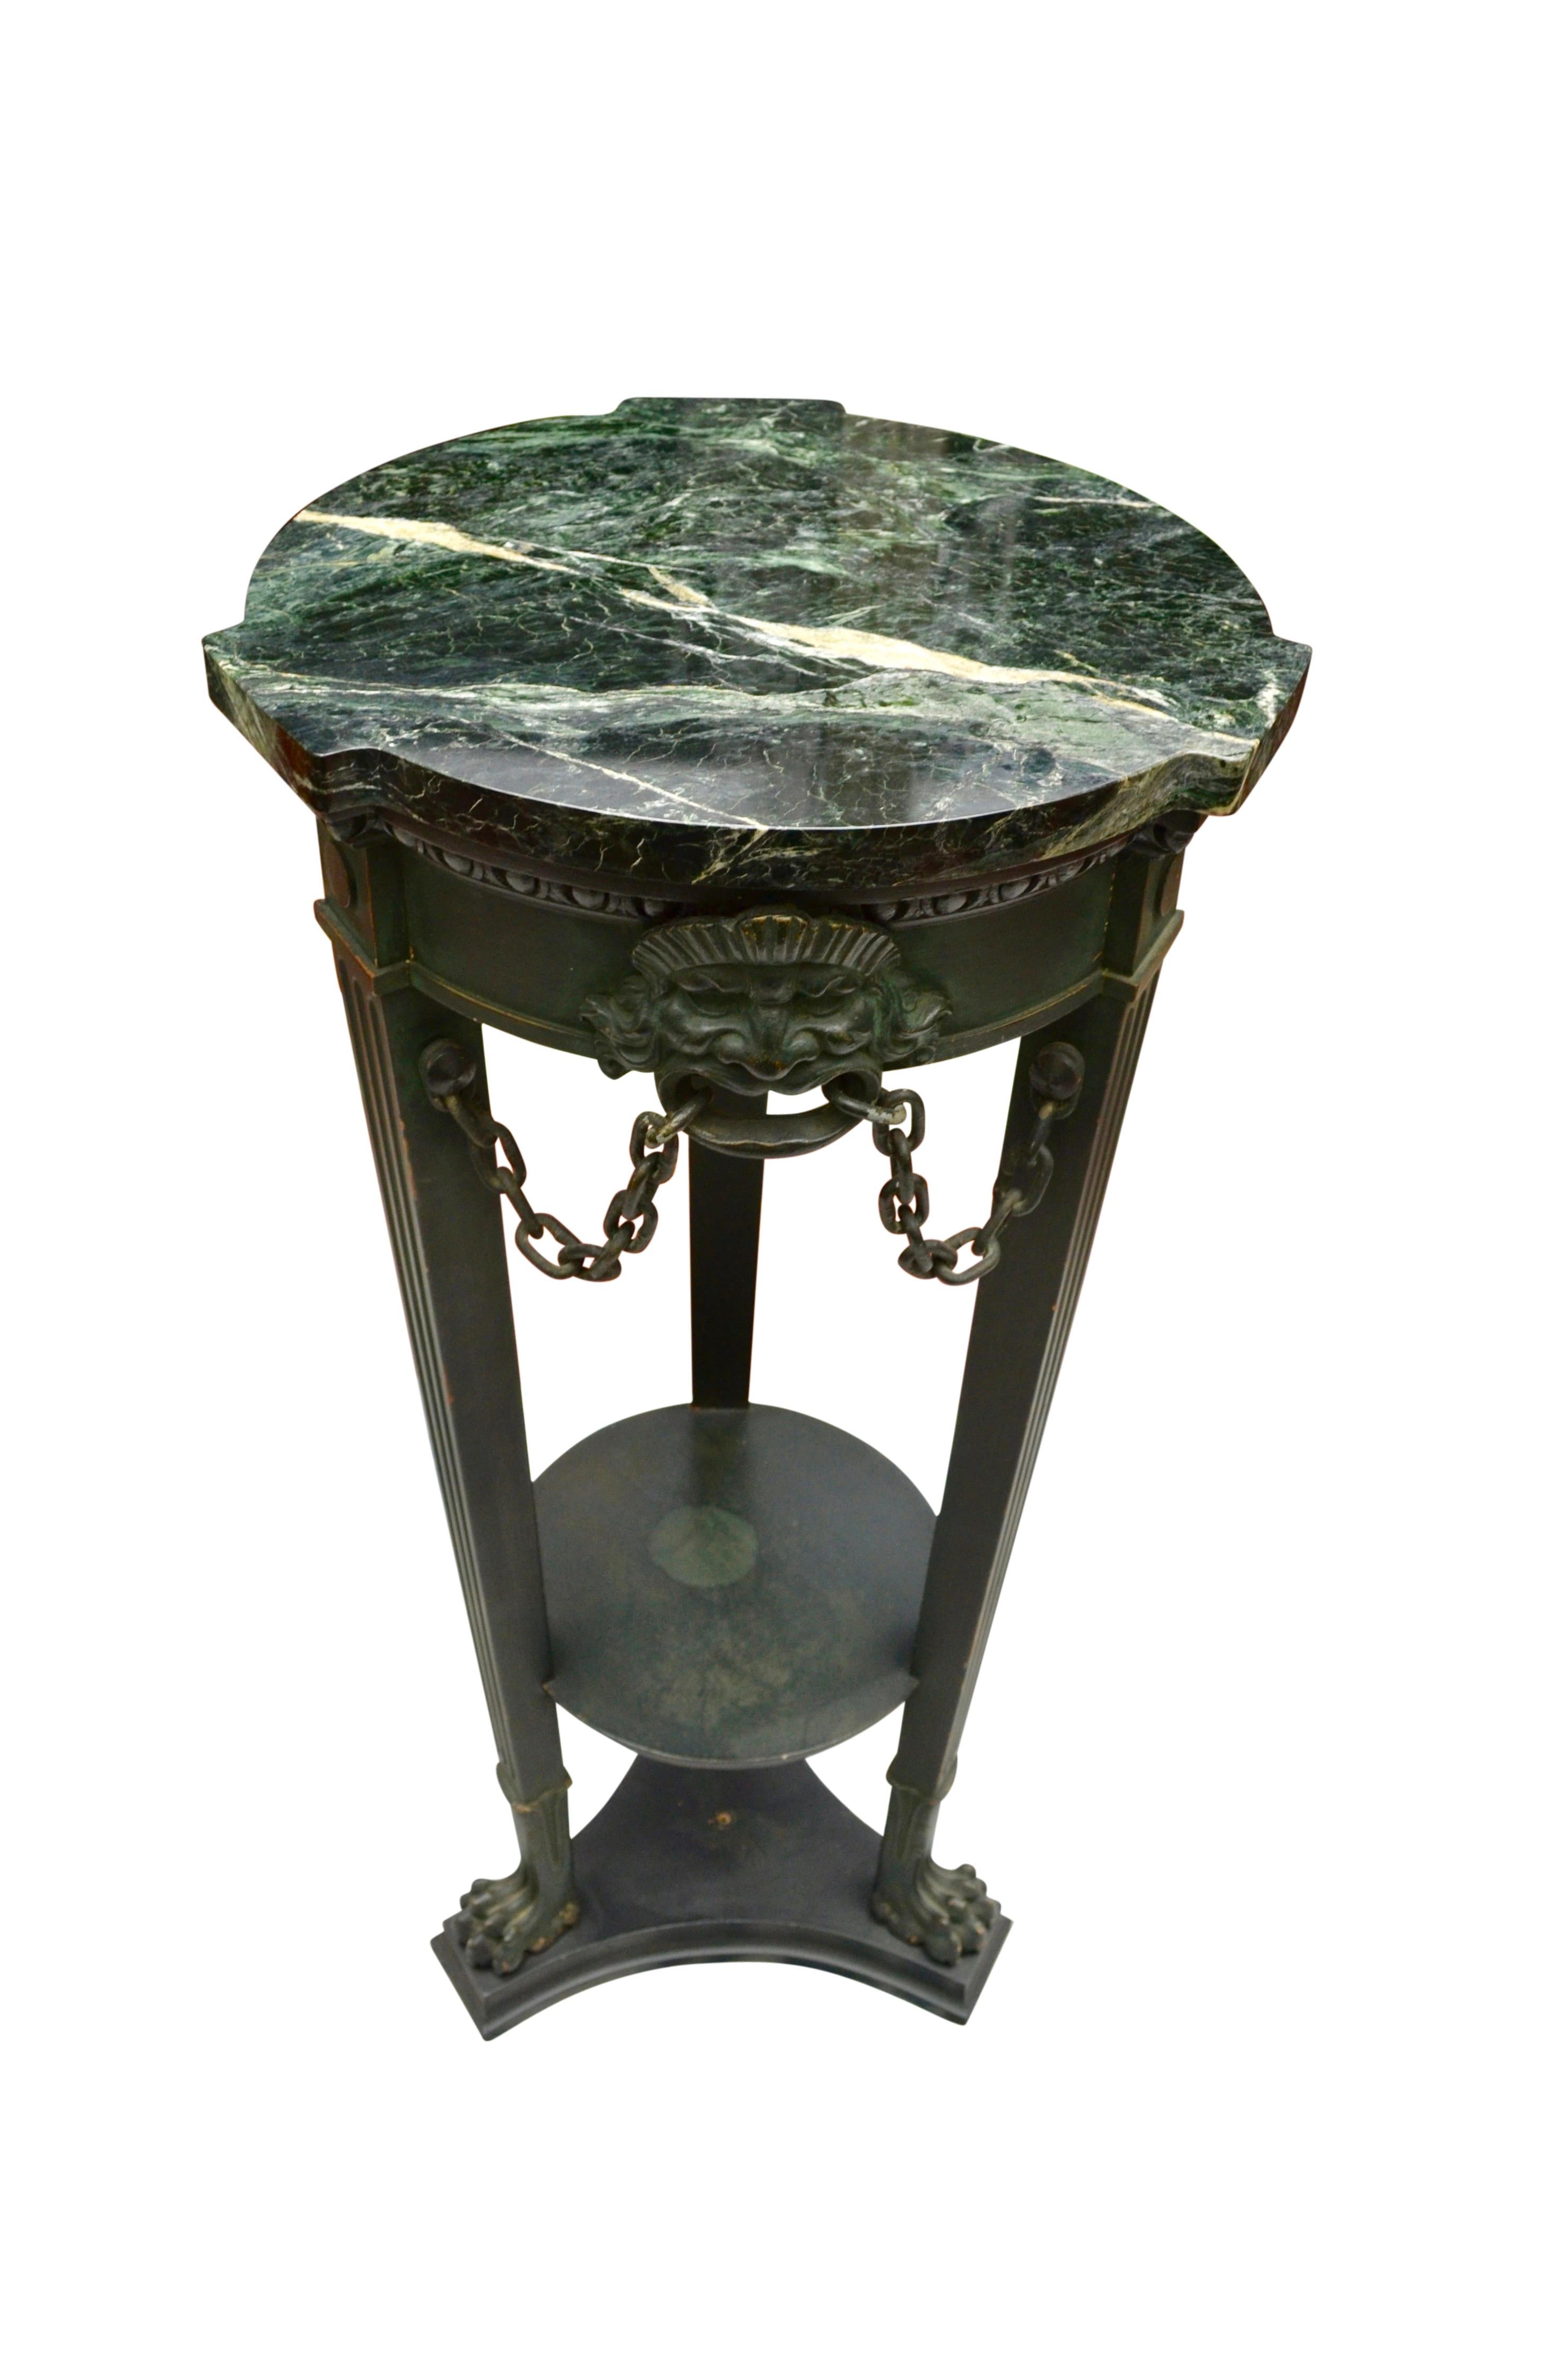 A classic painted wood marble and metal tri-pod pedestal modelled after an ancient pedestal discovered in Pompeii. Below the shaped green marble top are three metal grotesque masks which connect to the three legs with metal chains. The three fluted